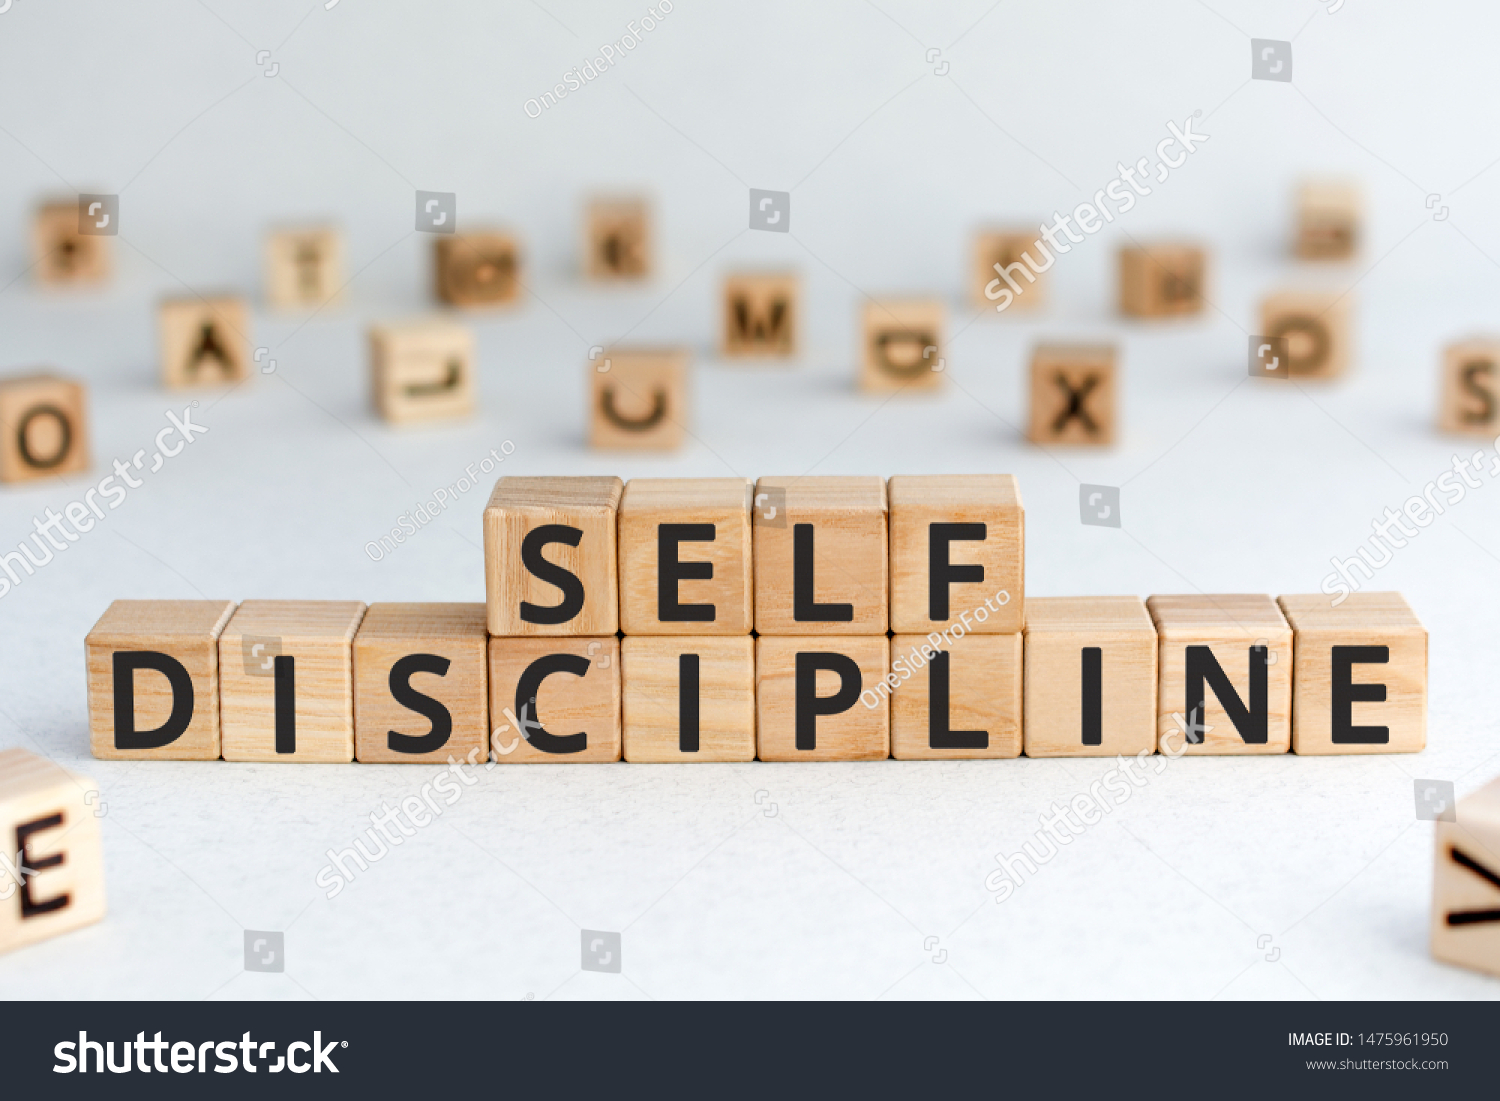 Self discipline - words from wooden blocks with letters, self-discipline concept, random letters around, white  background #1475961950